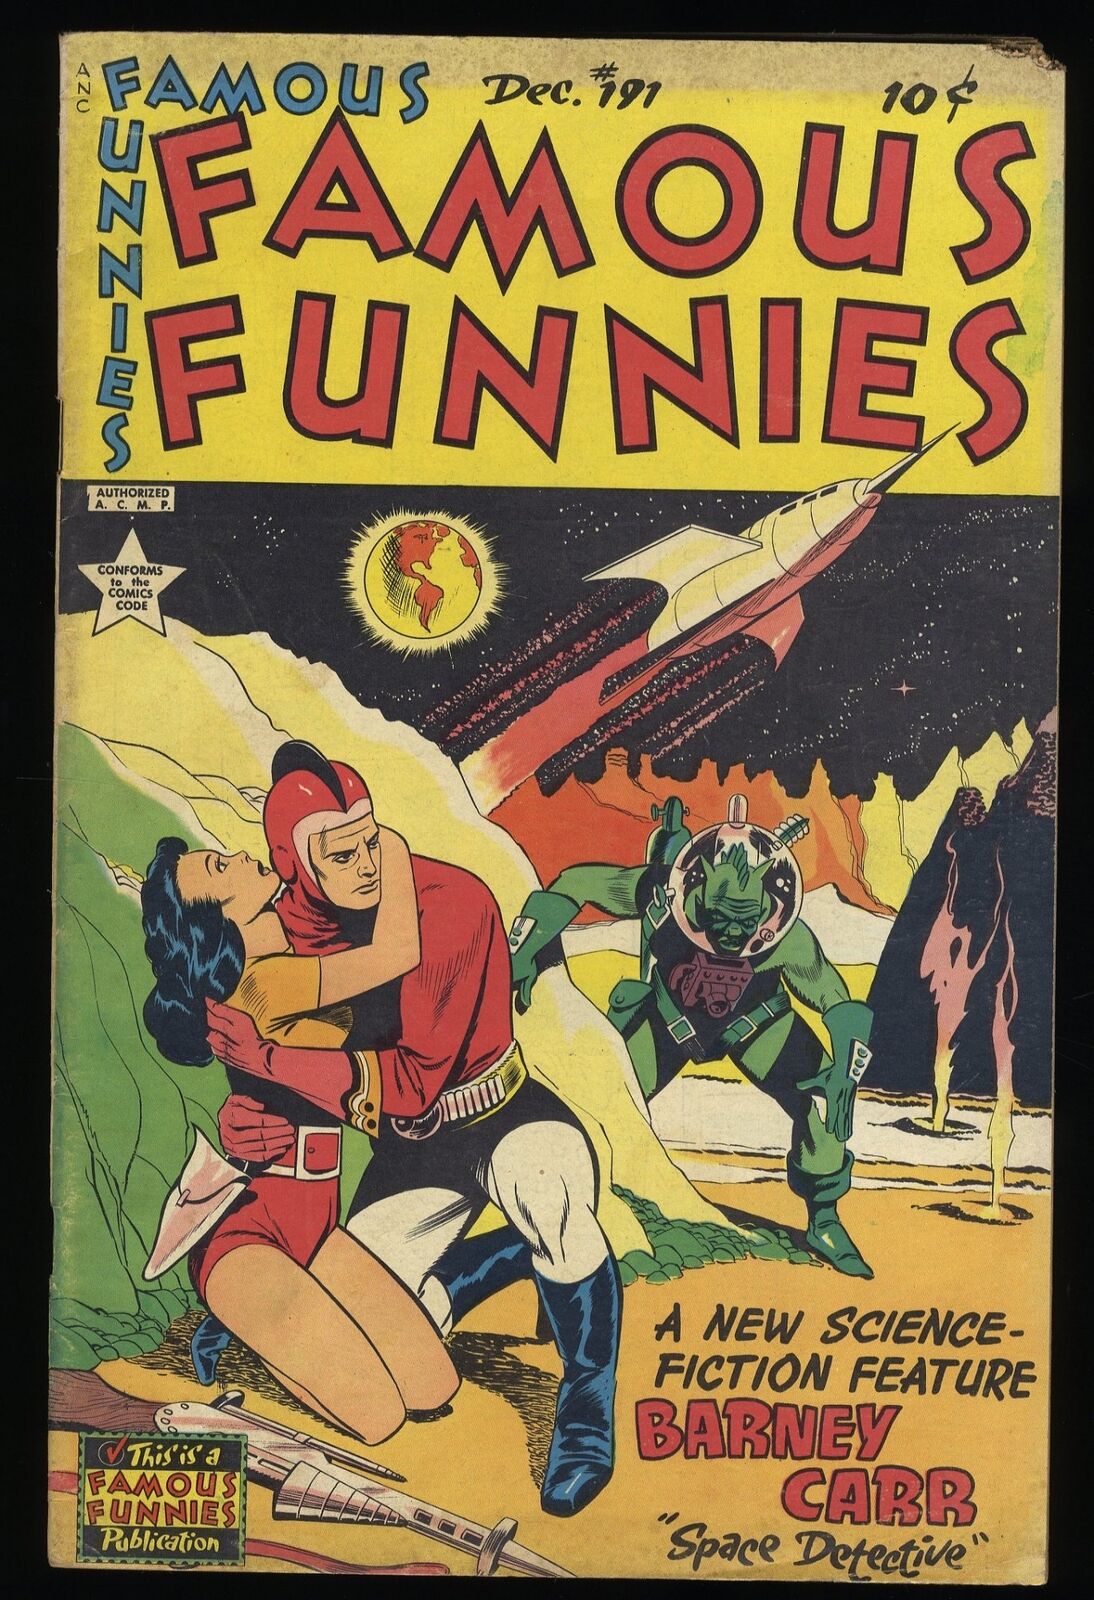 Famous Funnies #191 VG/FN 5.0 Barney Carr Space Detective Begins Buck Rogers